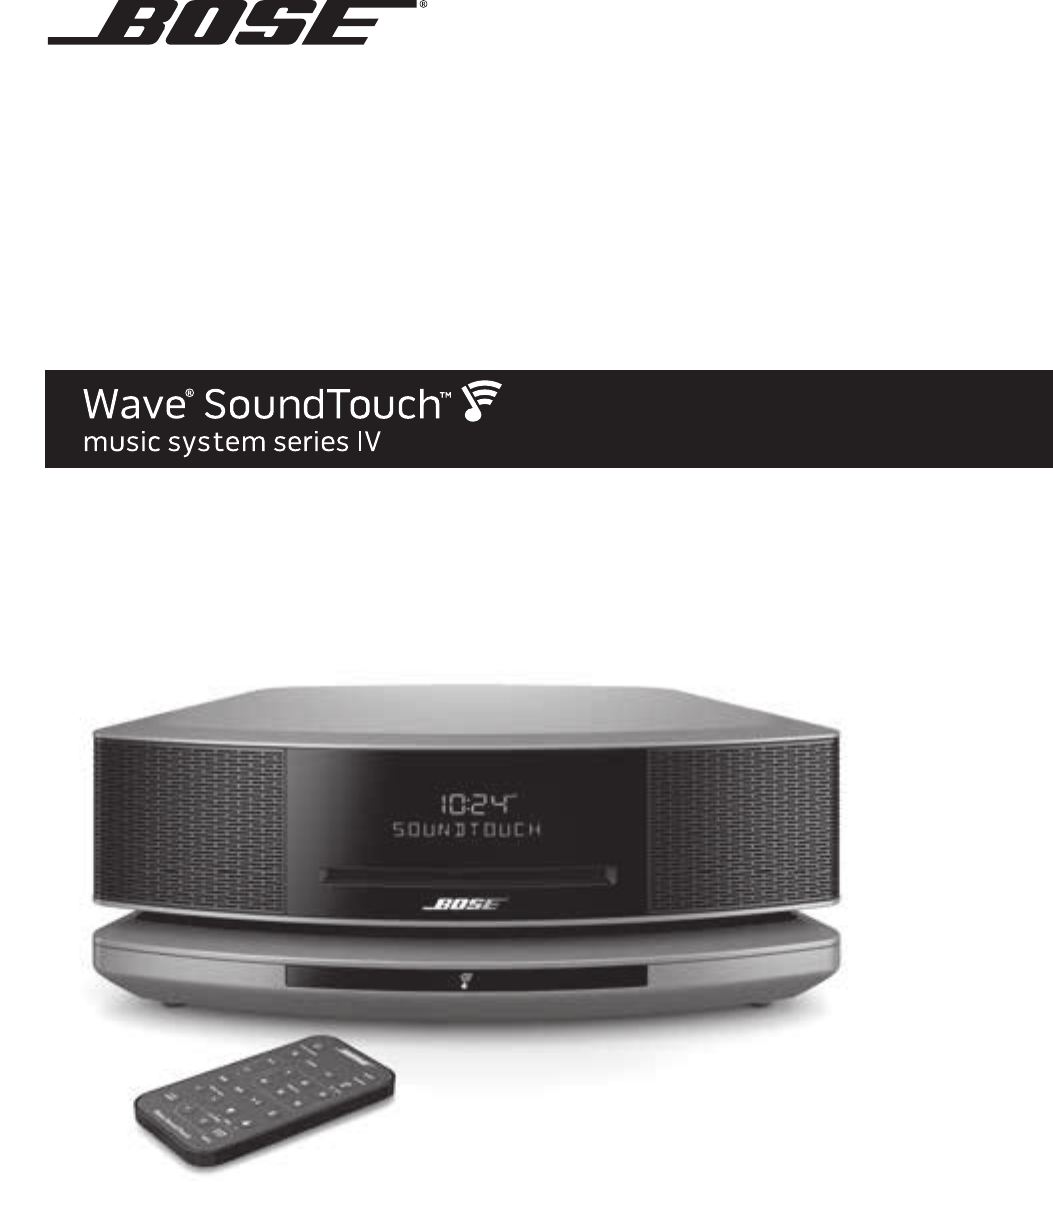 Handleiding Bose Wave SoundTouch music system series IV (pagina 1 van